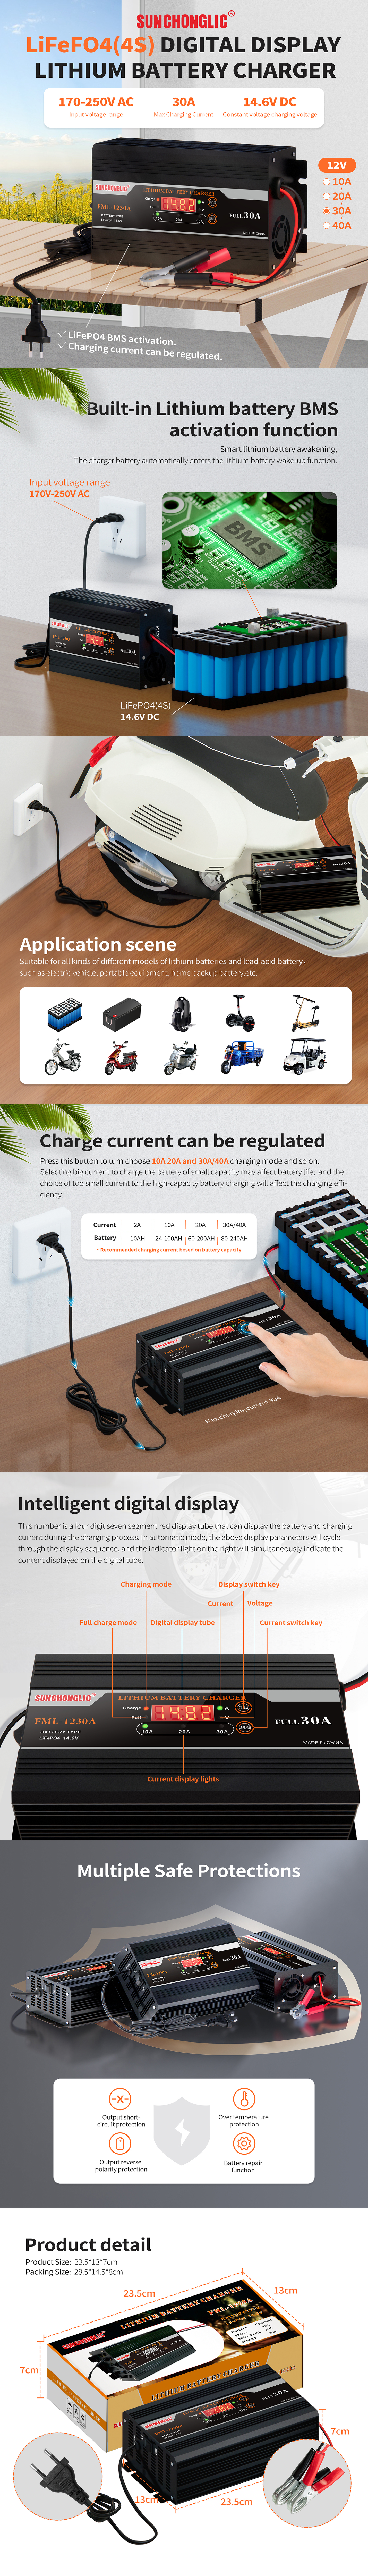 lithium Battery Charger